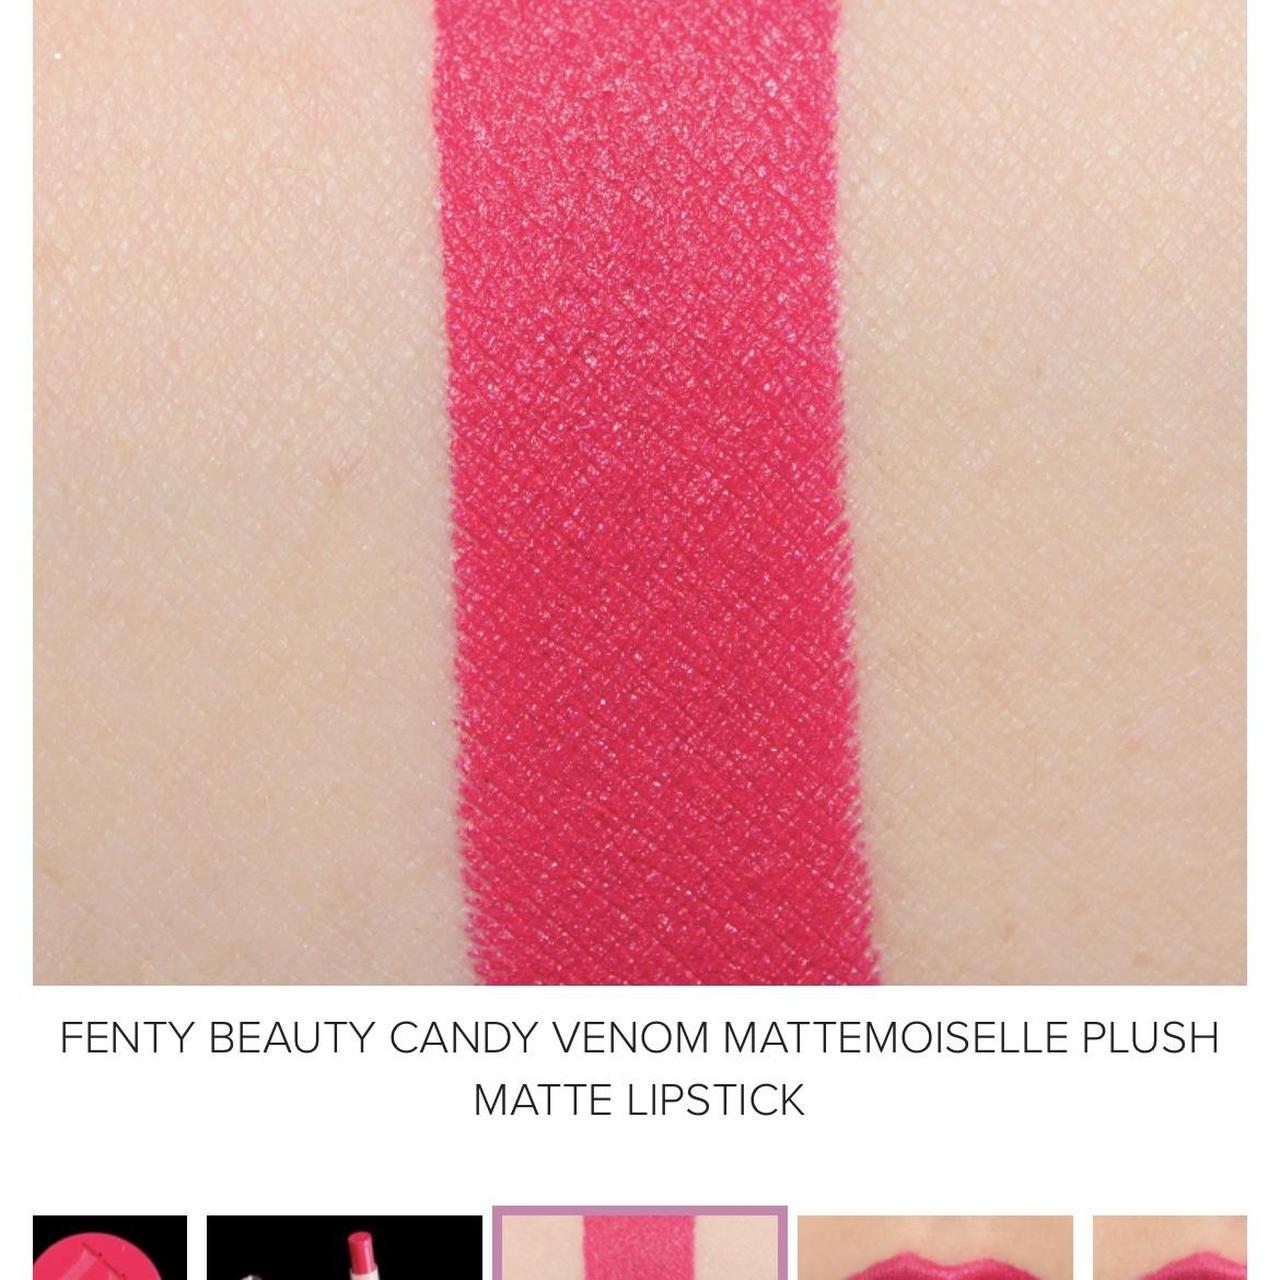 Fenty Beauty Pink and Red Makeup (4)